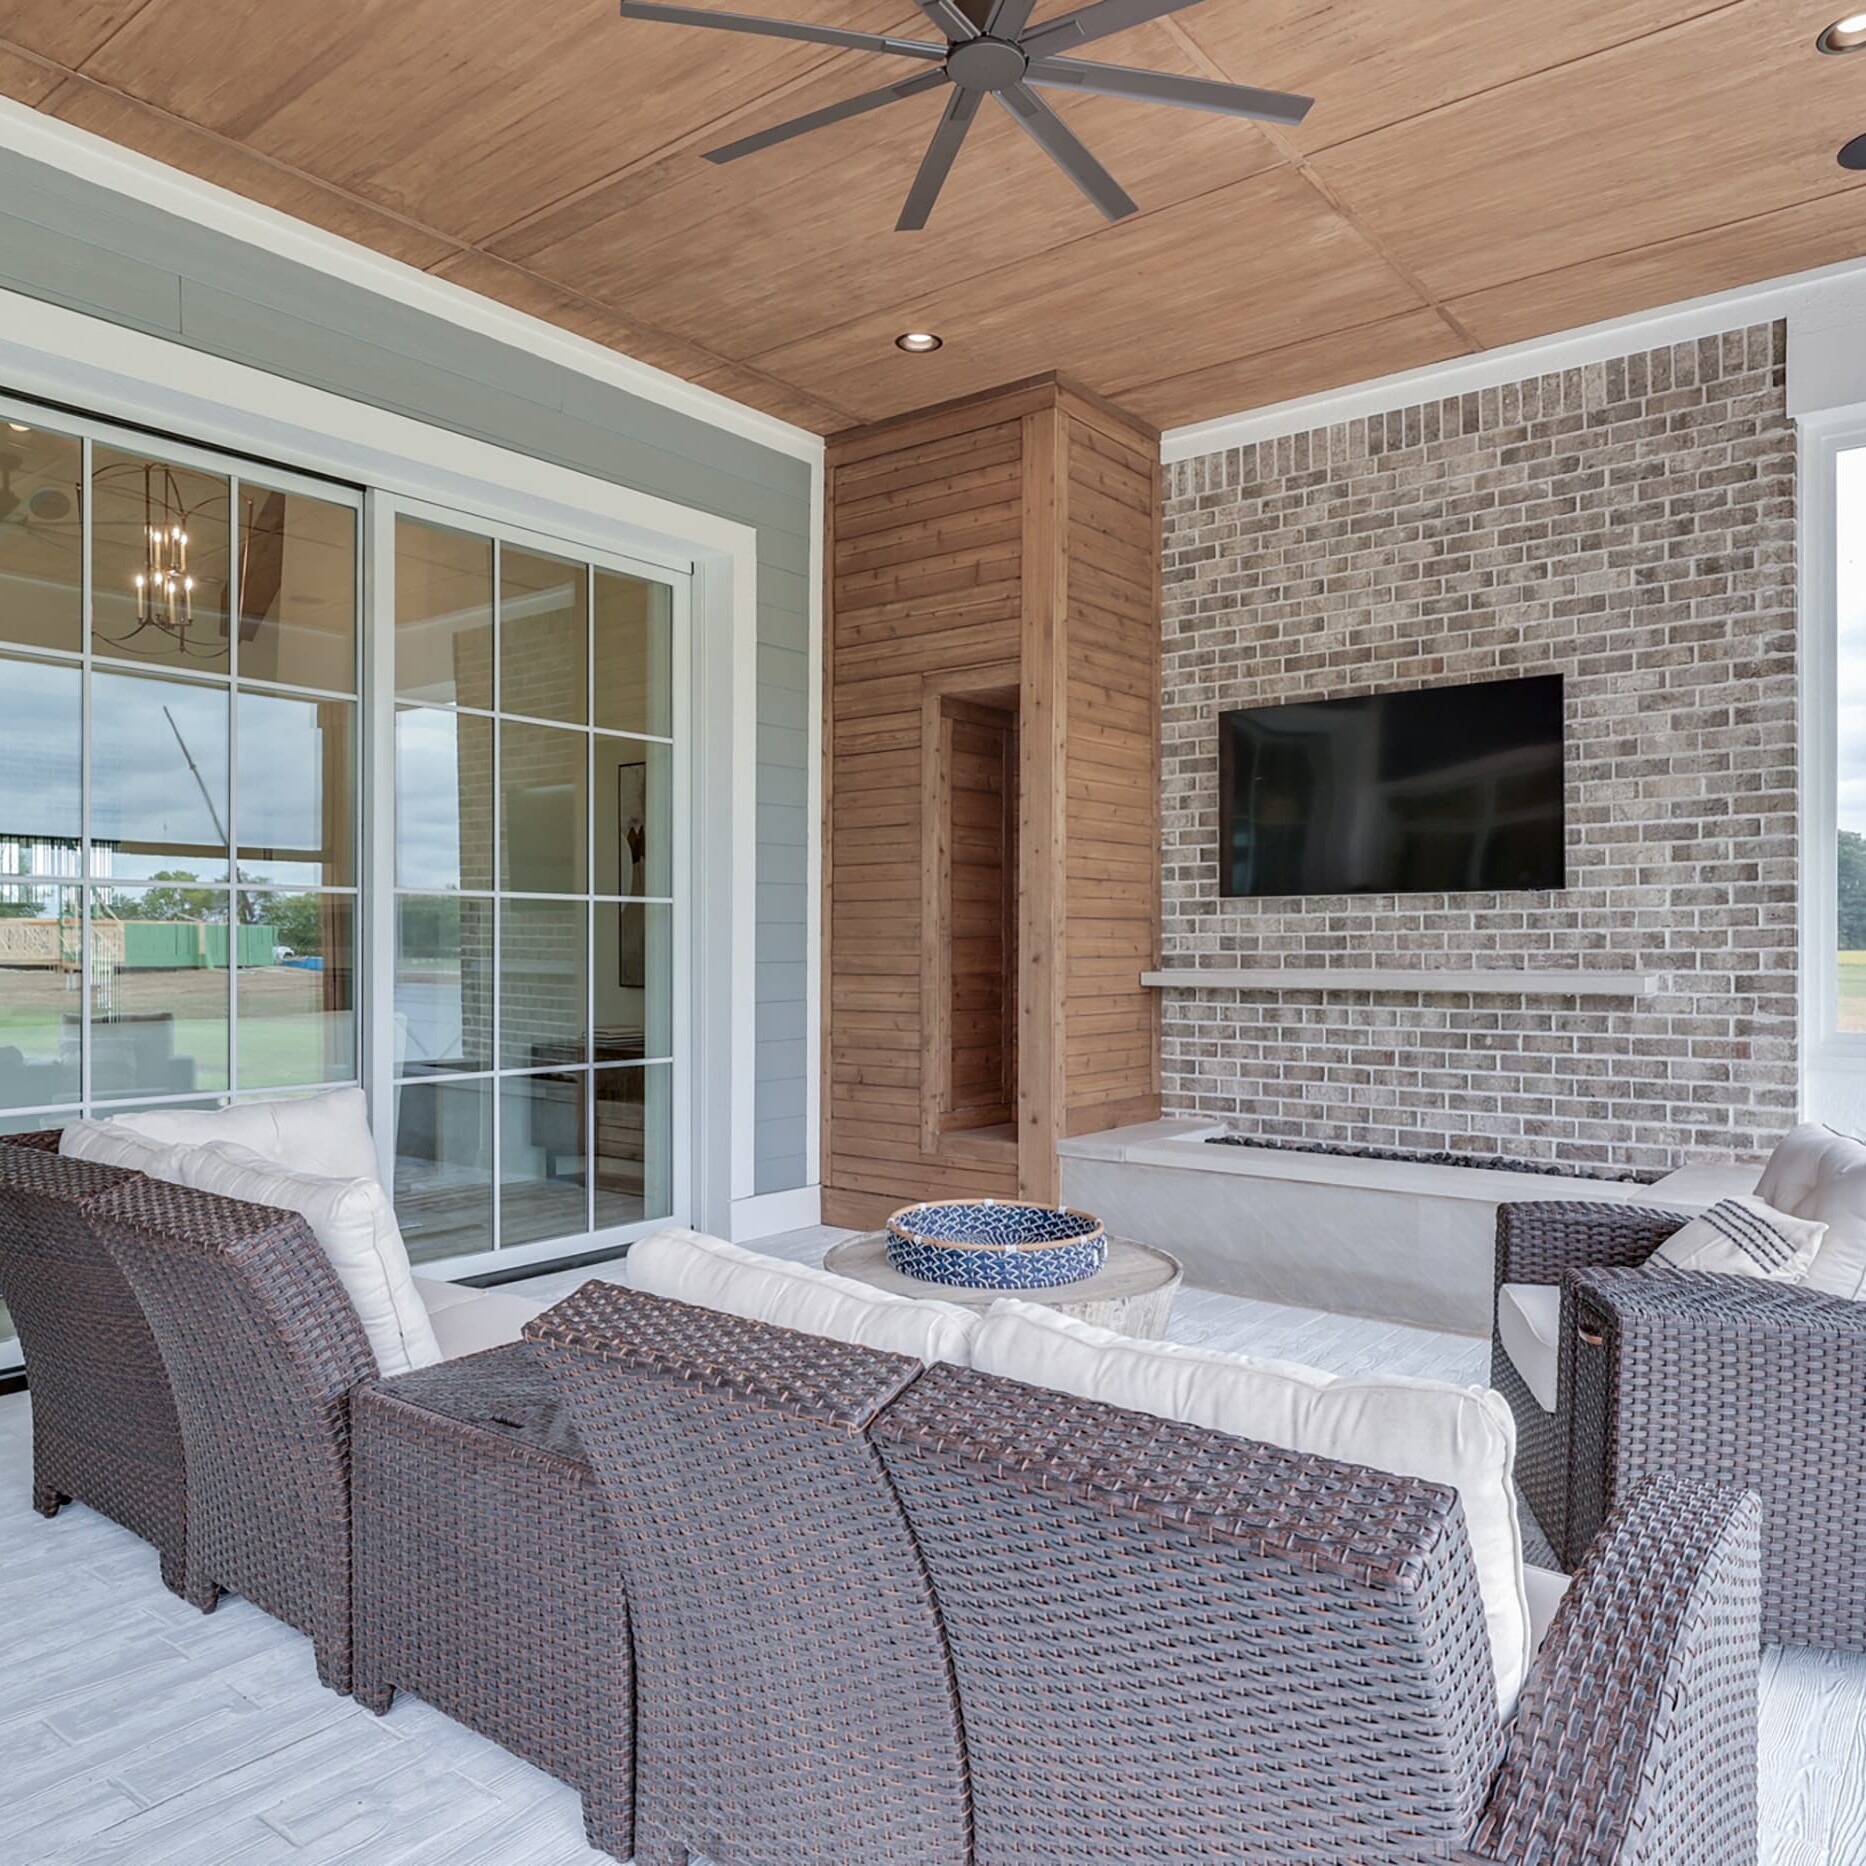 An outdoor living area with wicker furniture and a tv.